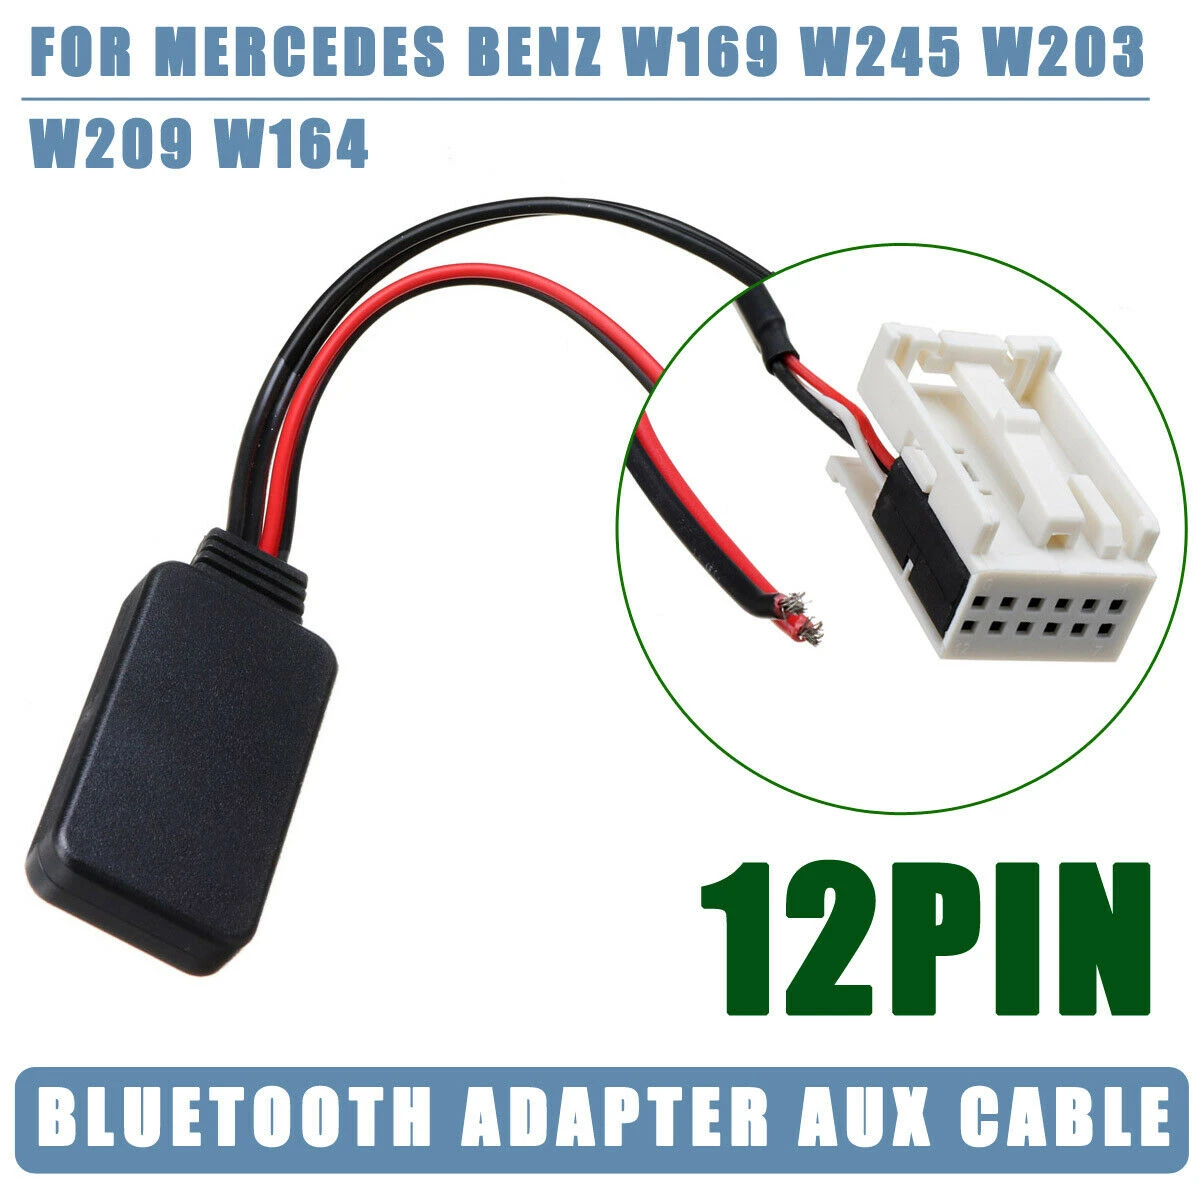 domineren Refrein heilig 12Pin Bluetooth Adapter Wireless Aux Cable For Mercedes Benz W169 W245 W203  W209 W164 CD Radio Stereo|Cables, Adapters & Sockets| - AliExpress